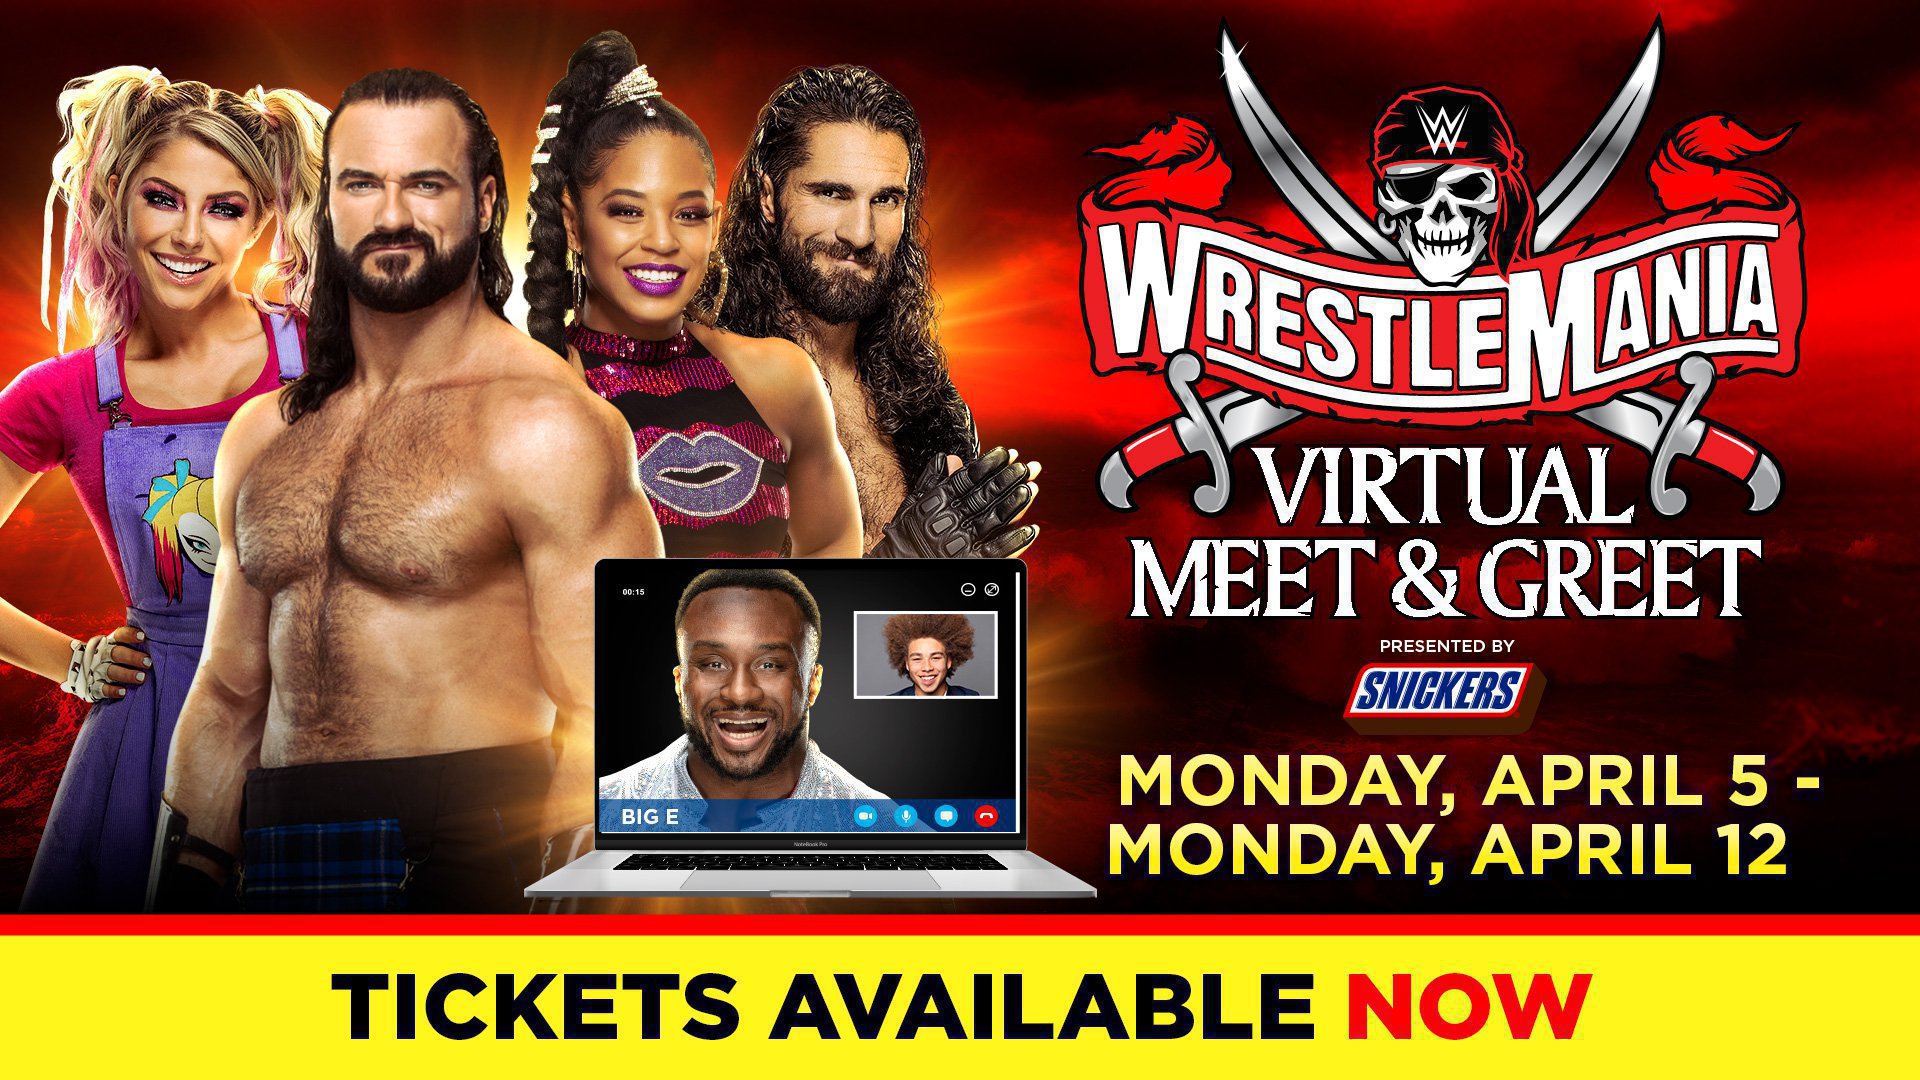 Tickets available now for the largest selection of WWE Virtual Meet